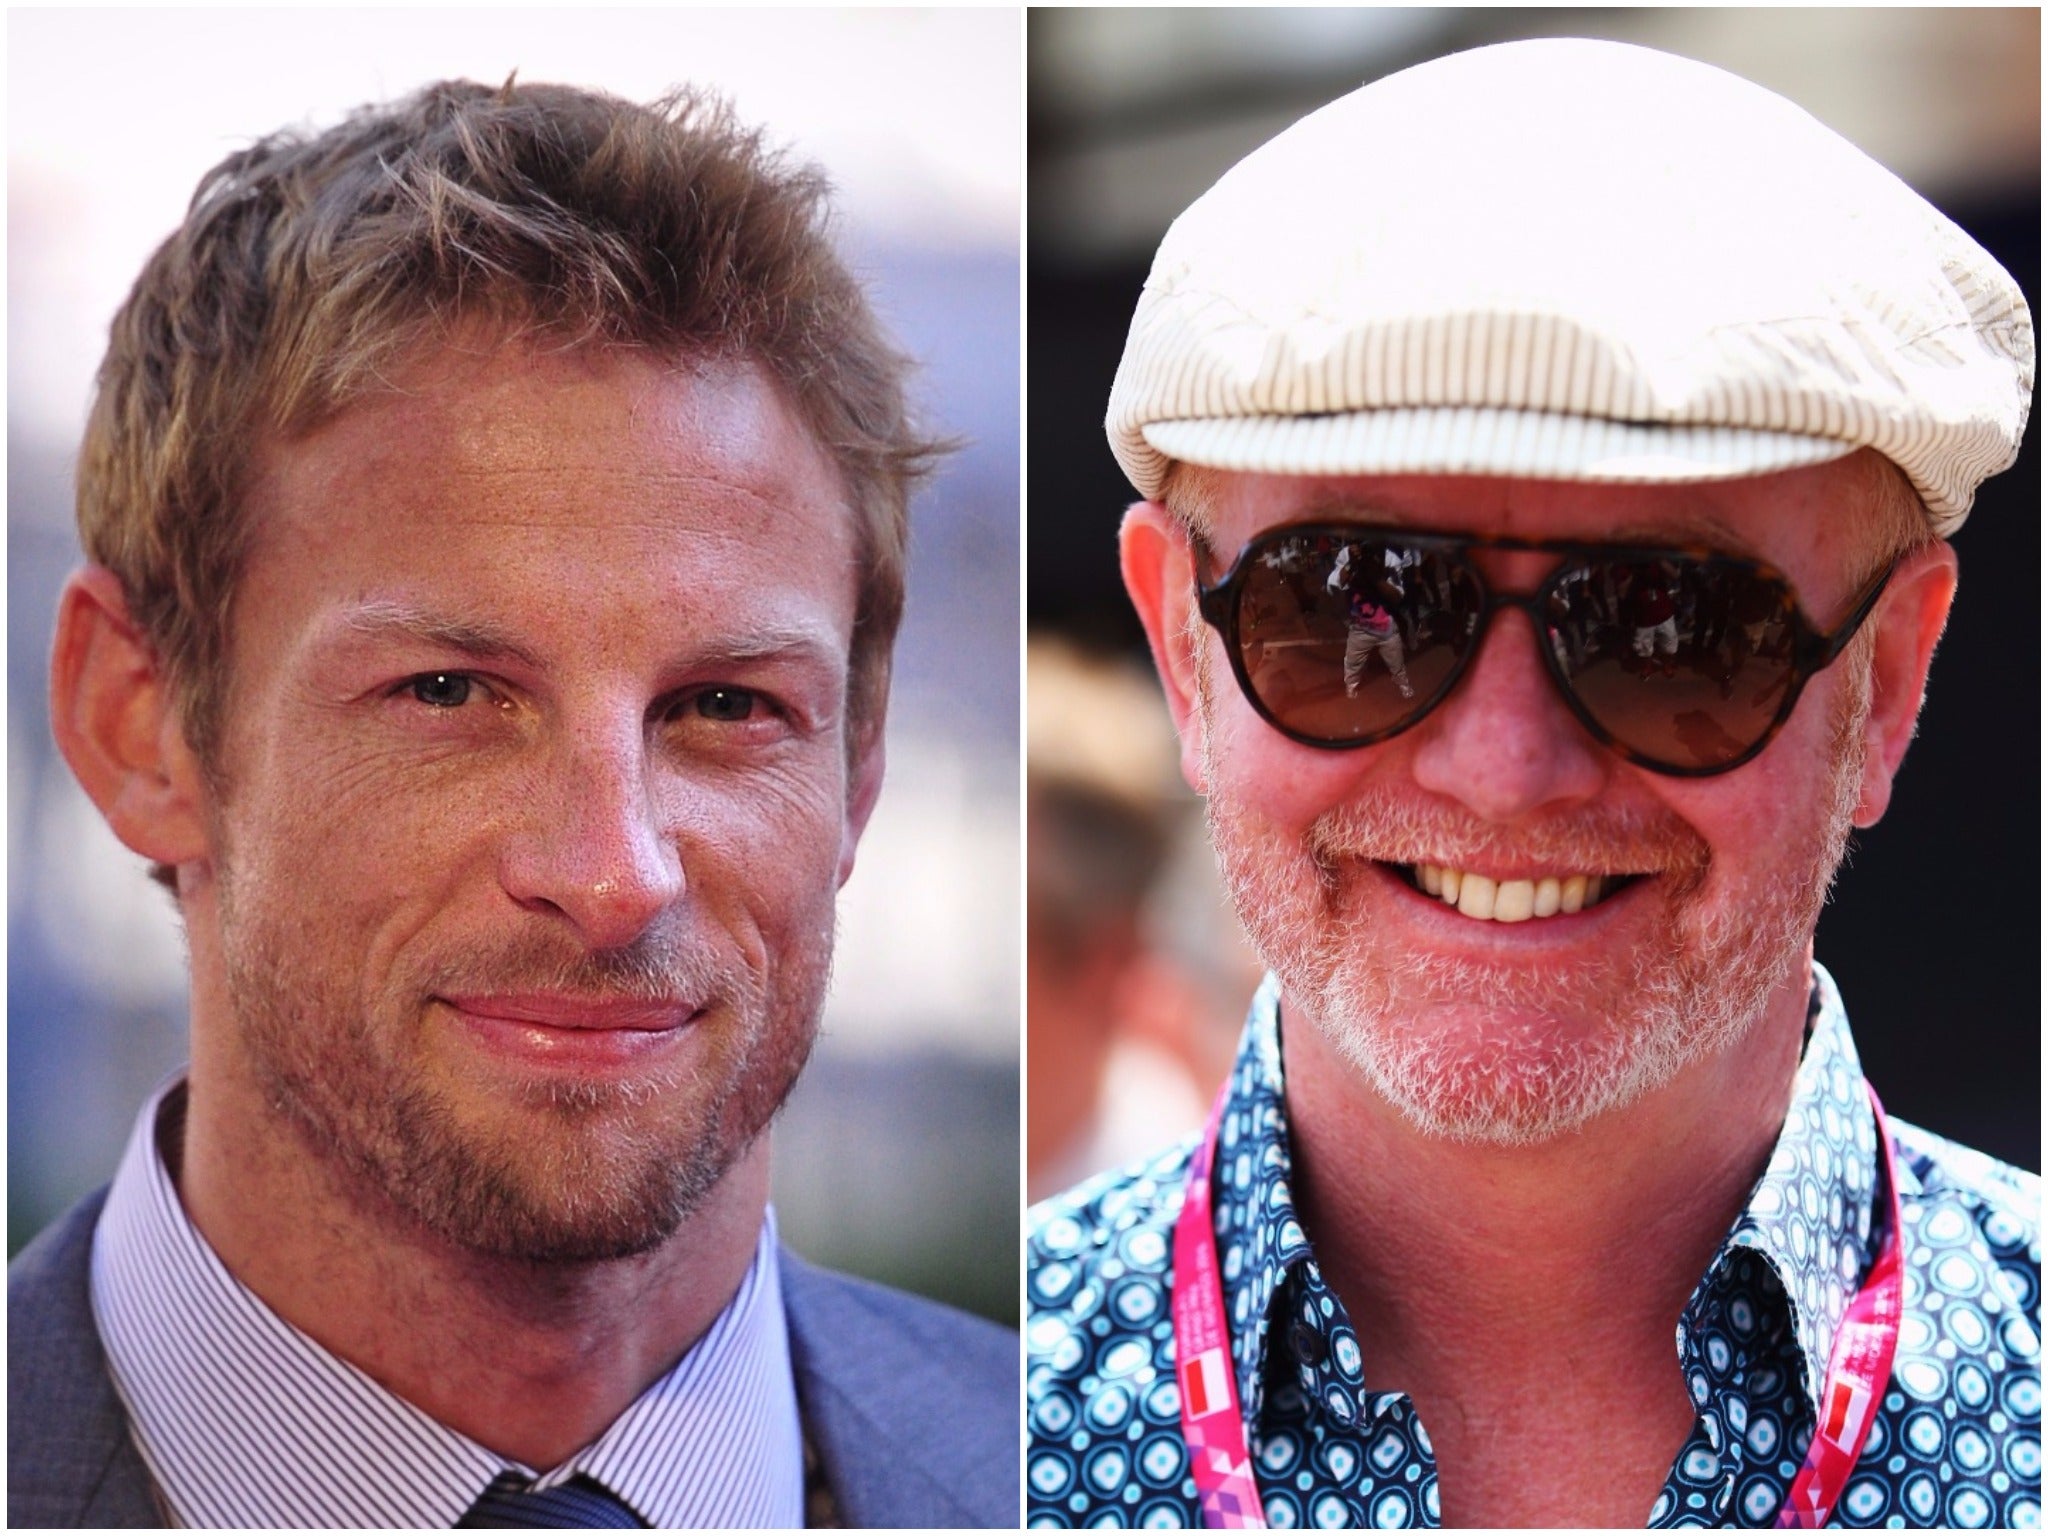 Jenson Button was 'so close' to joining BBC's new series of Top Gear